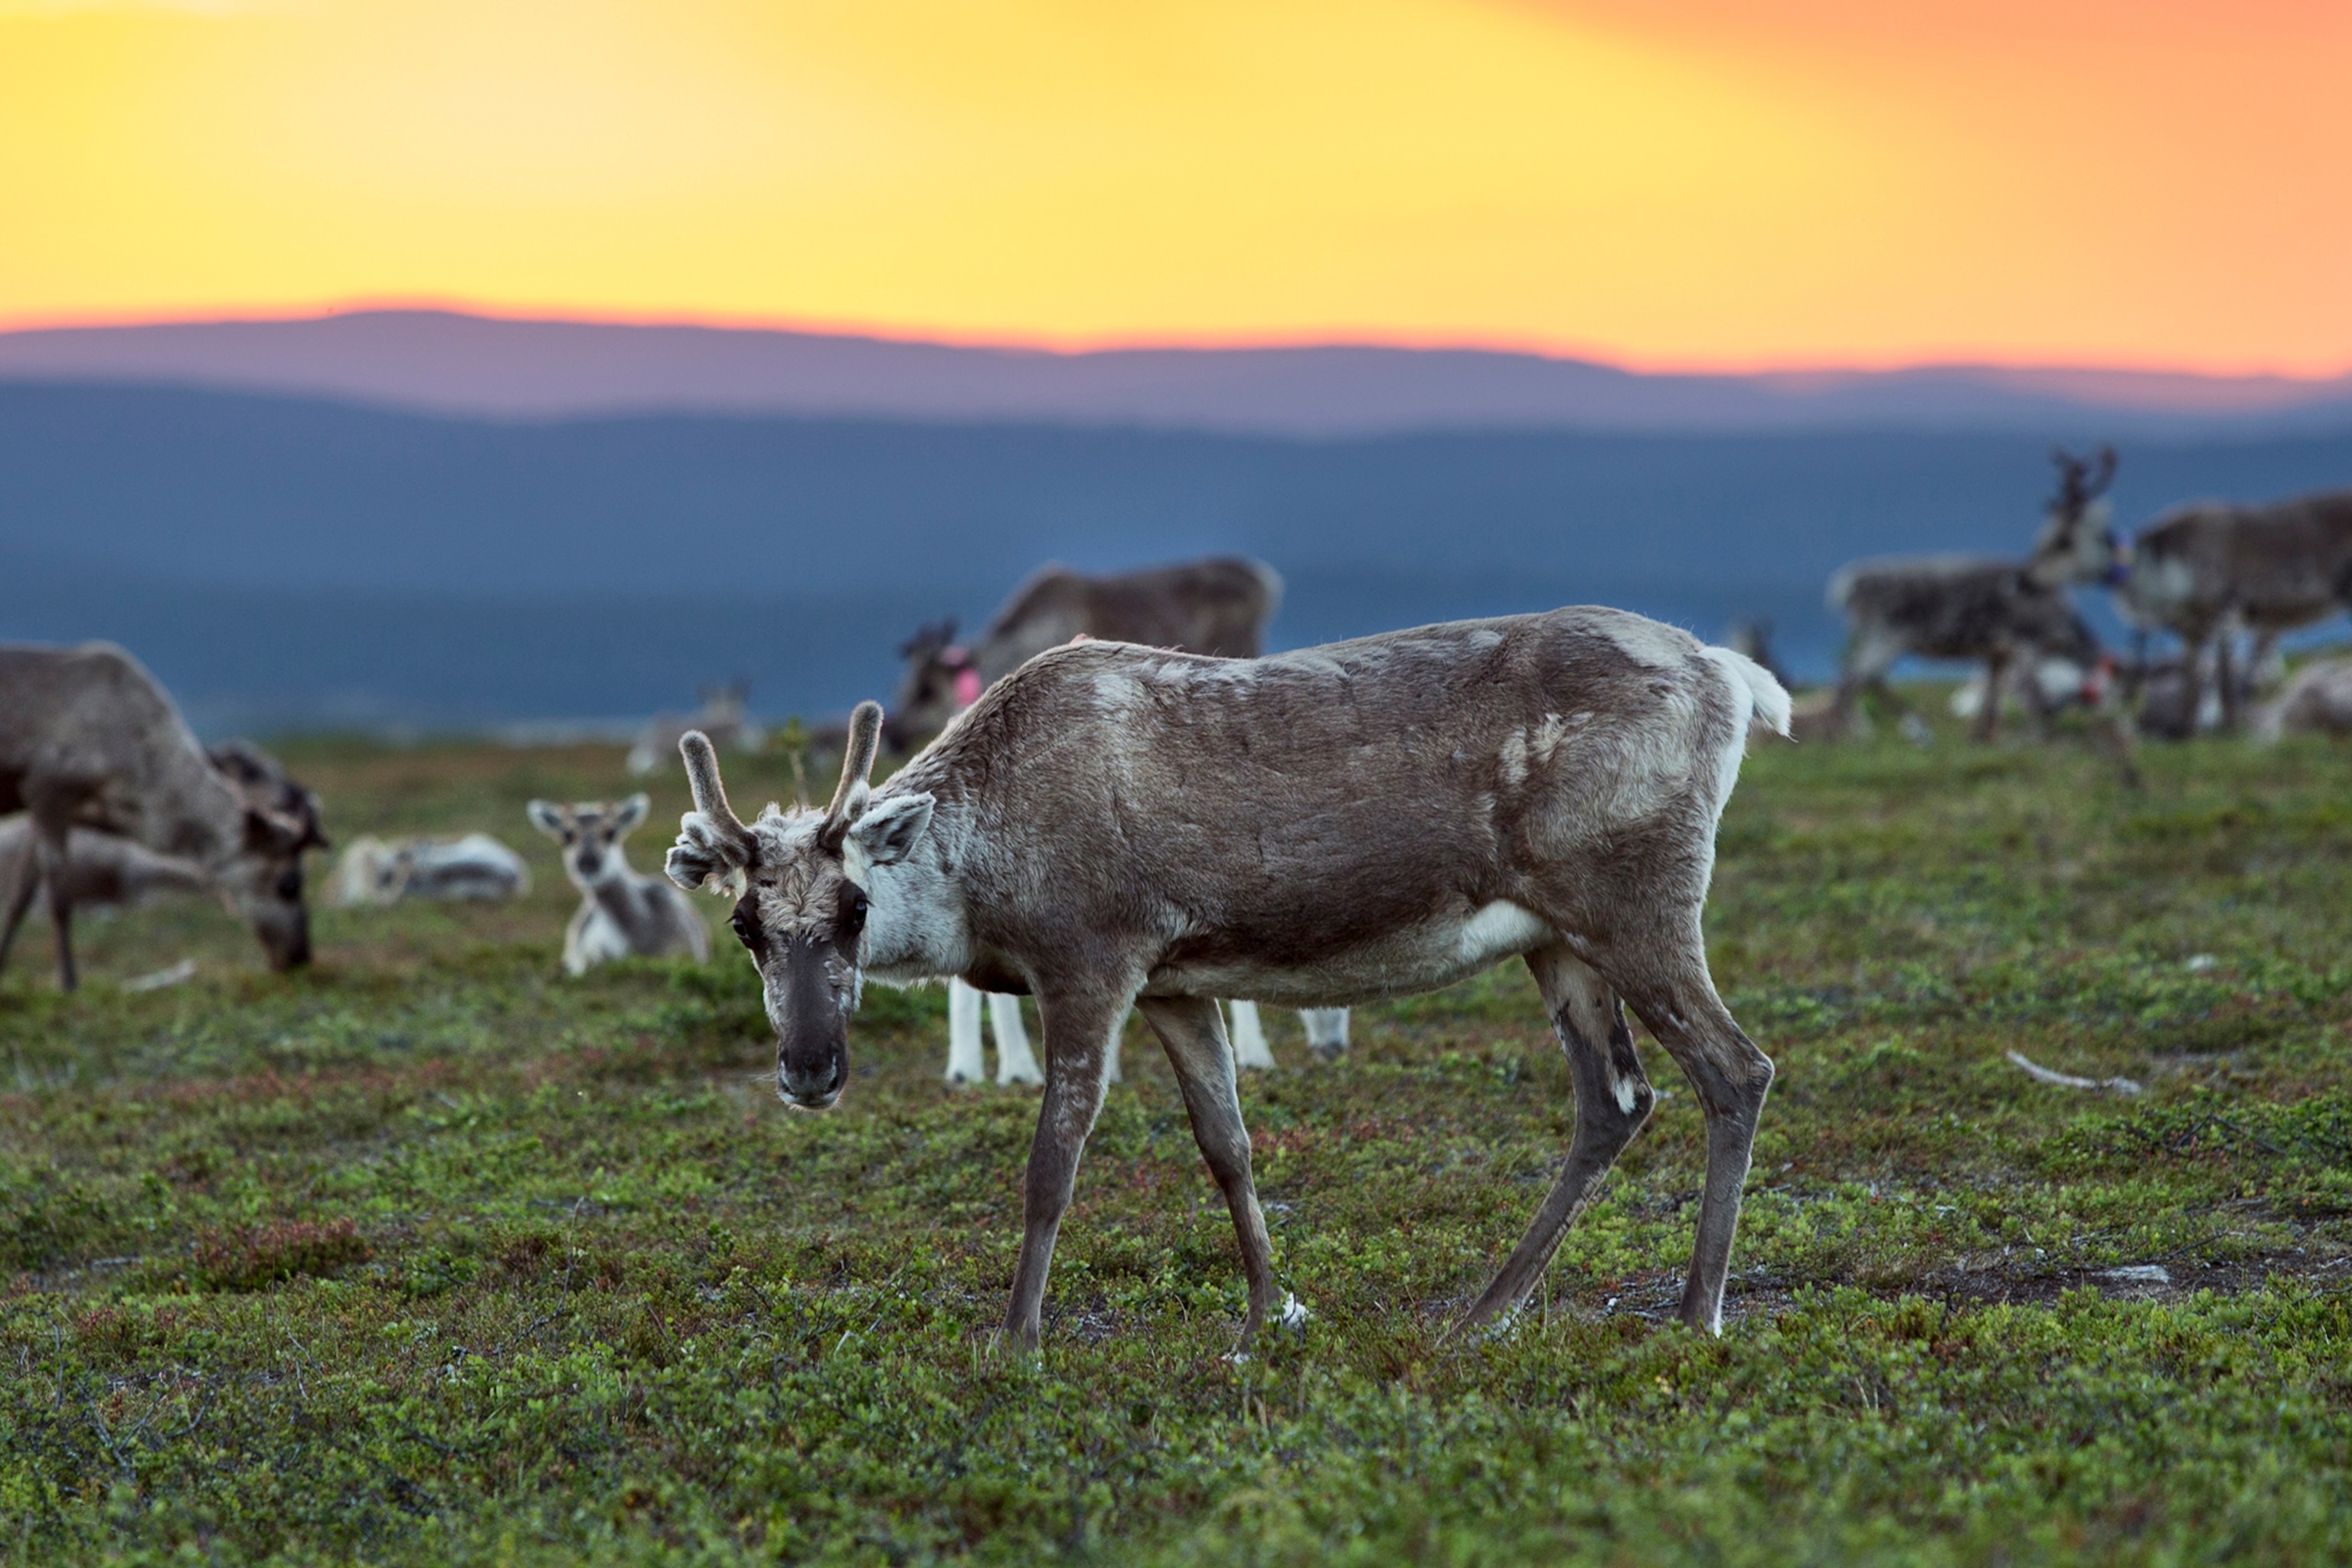 A Finnish reindeer looking at the camera